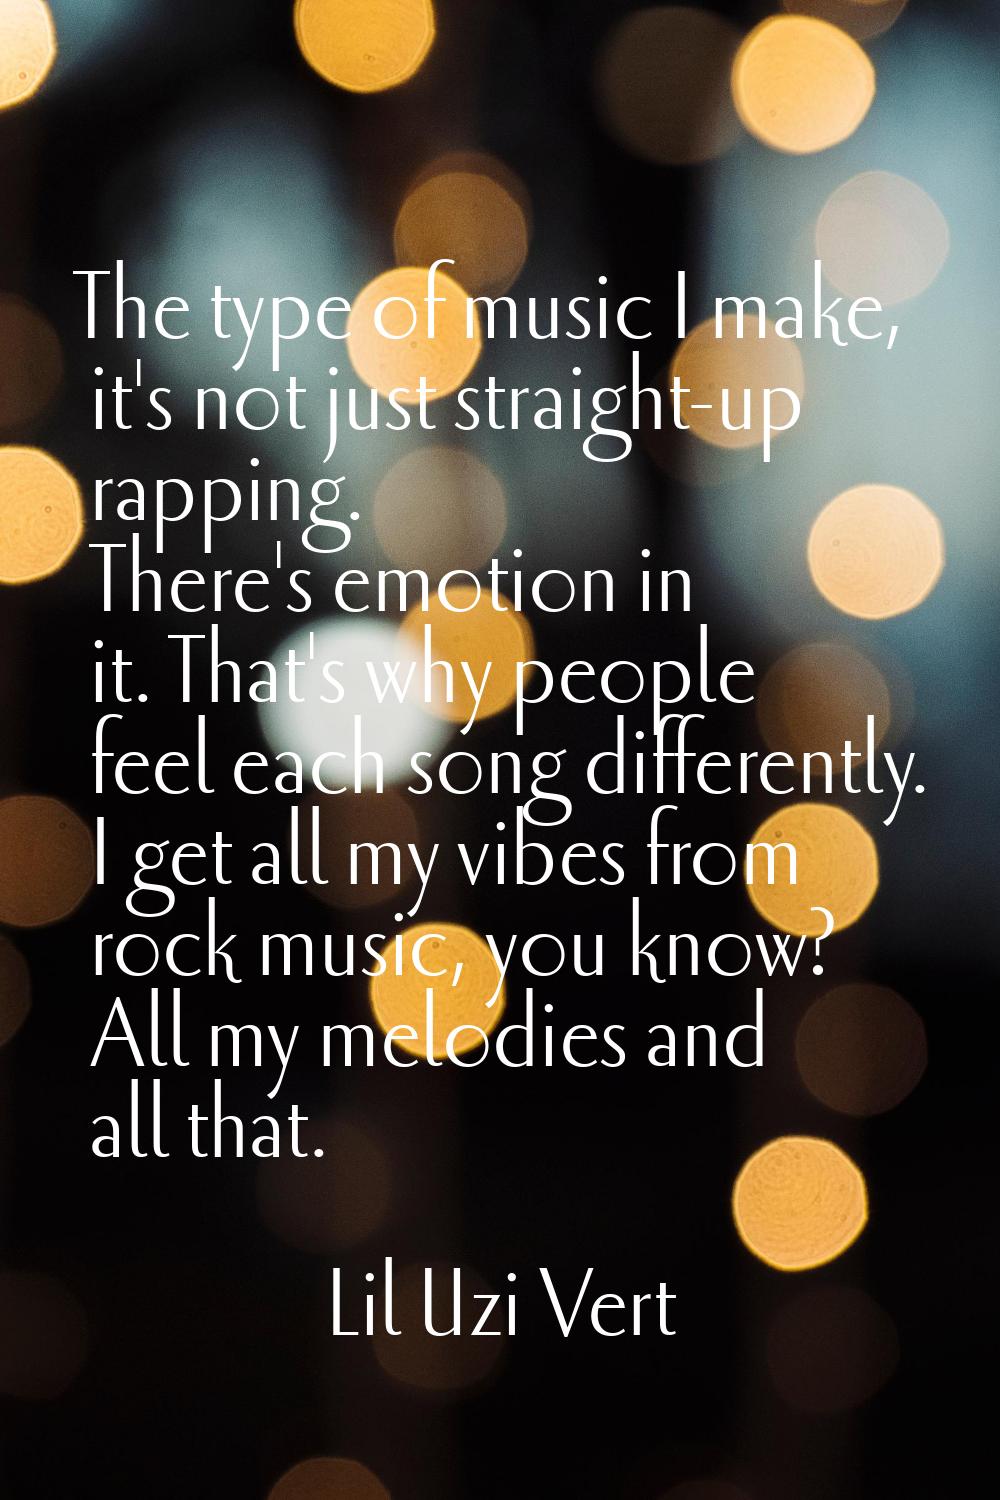 The type of music I make, it's not just straight-up rapping. There's emotion in it. That's why peop